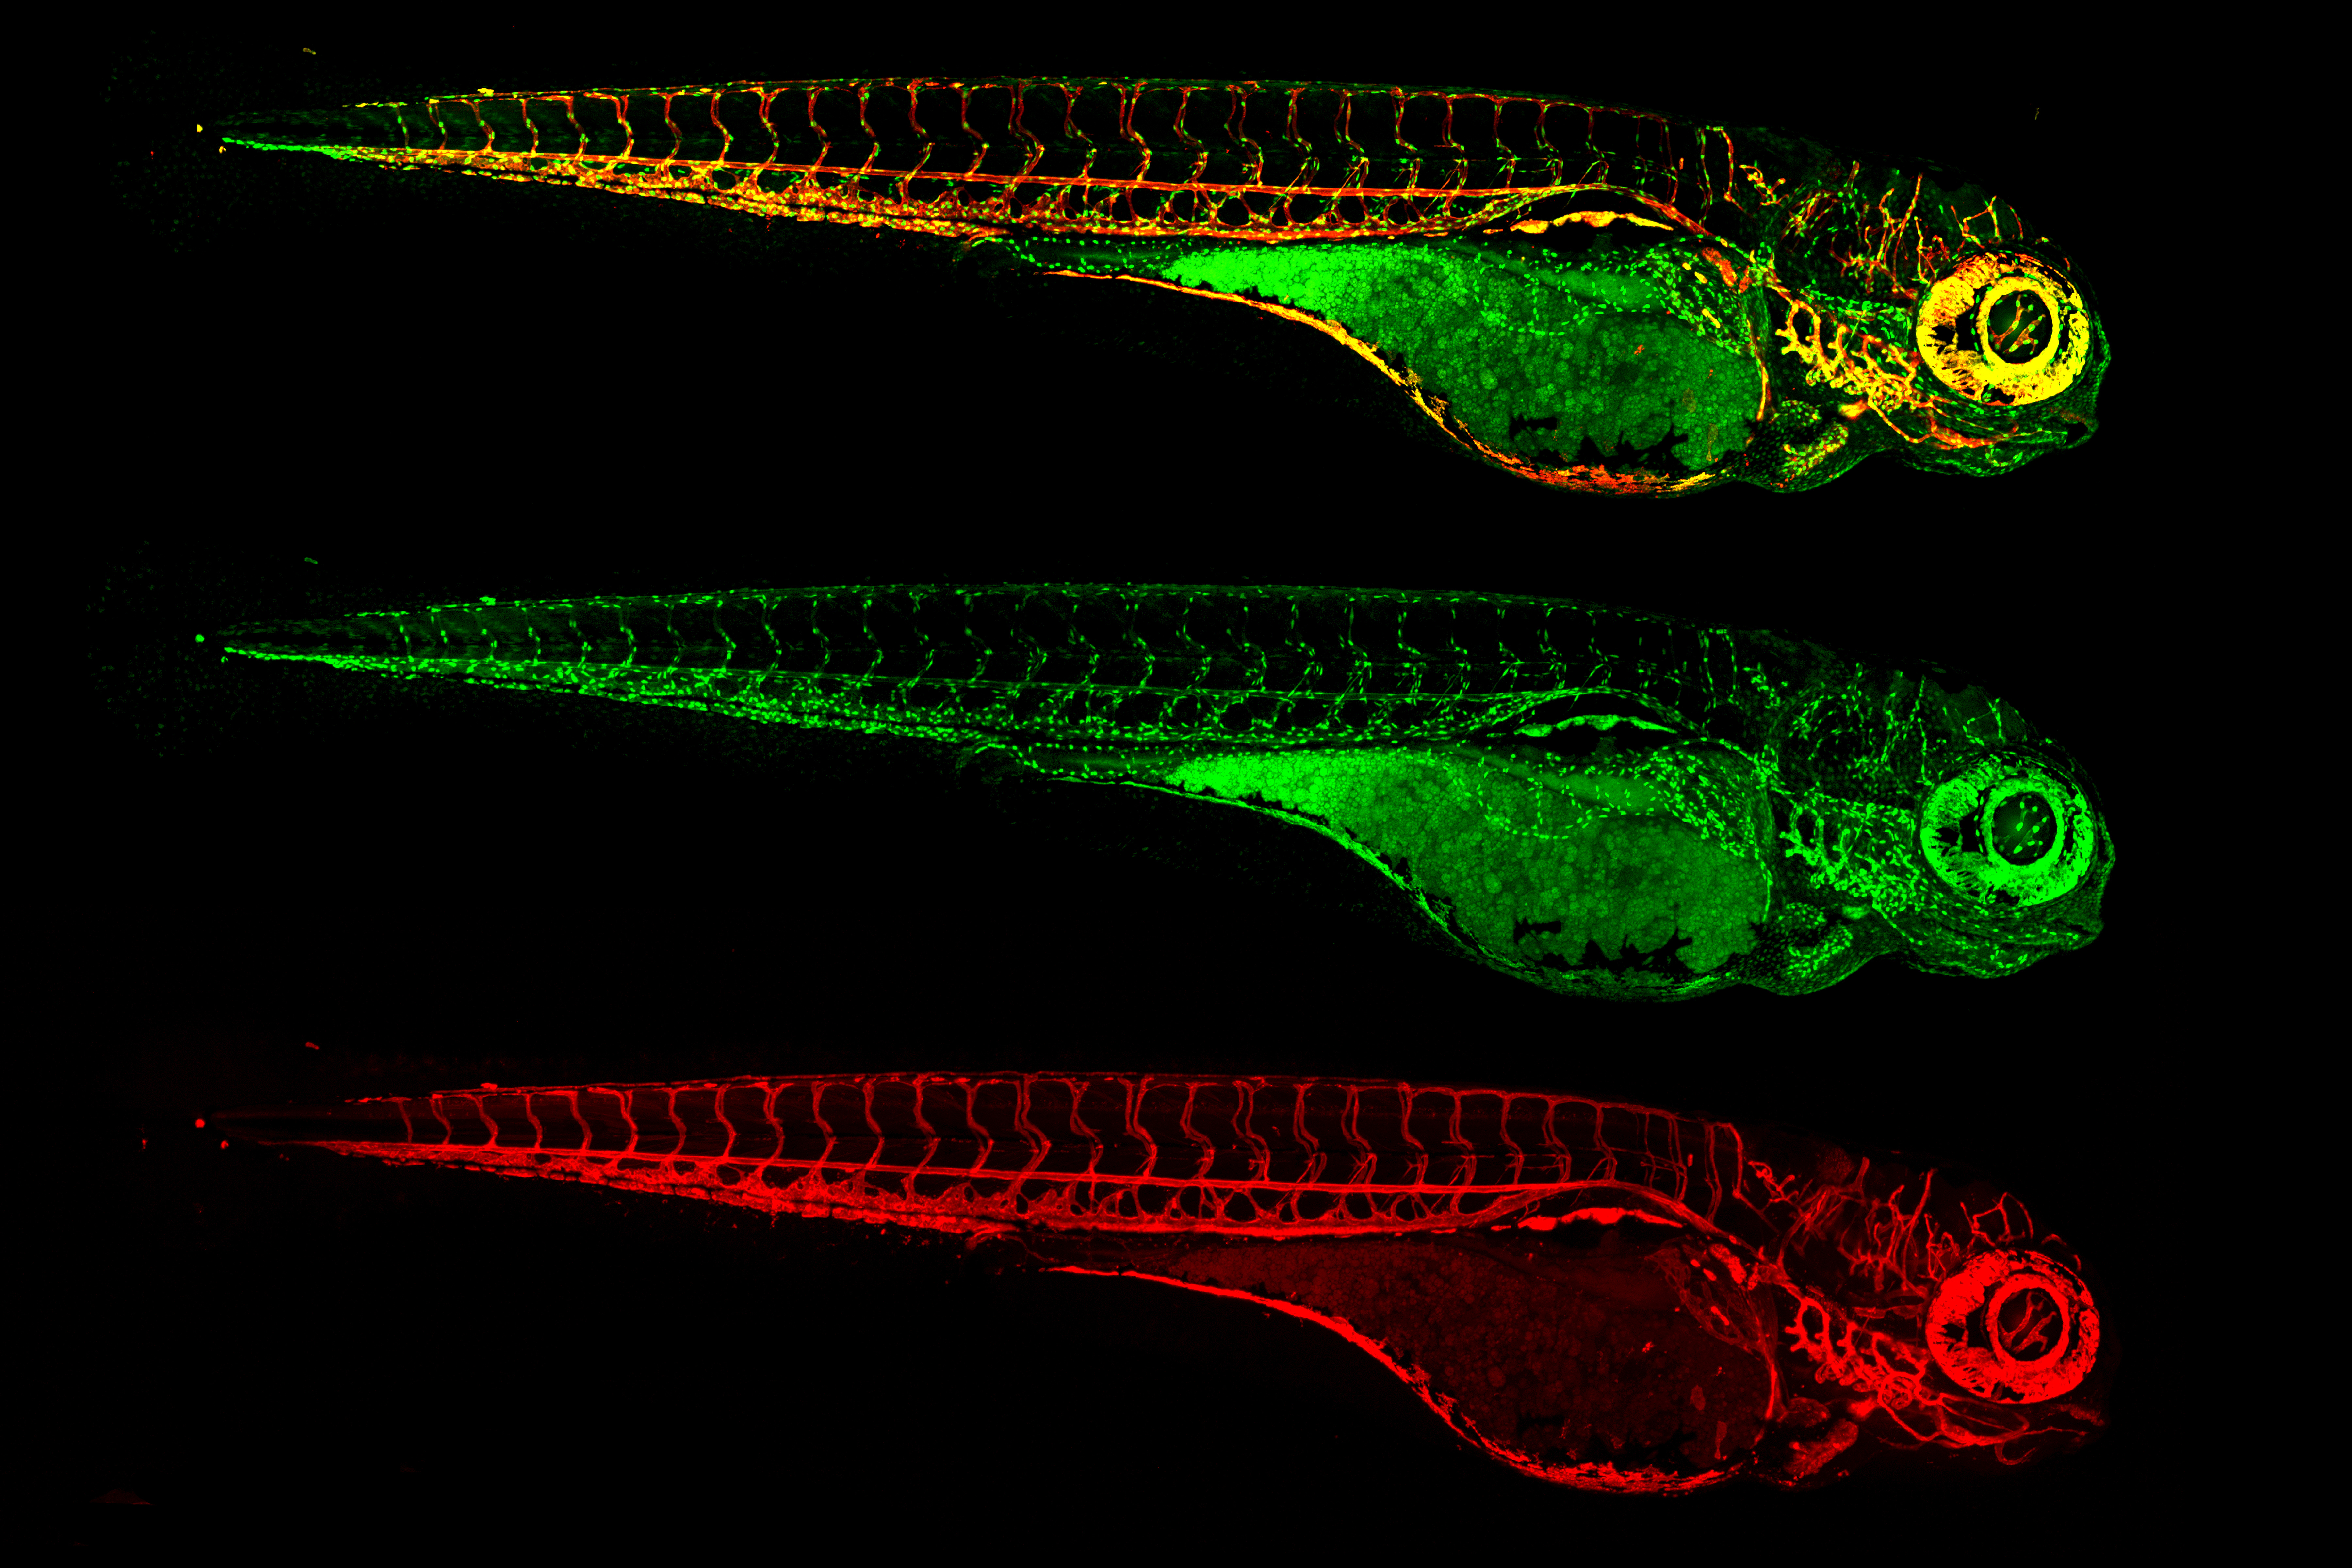 Zebrafish larva bioengineered two have blood vessels glow in red and blood vessel cell nuclei in green